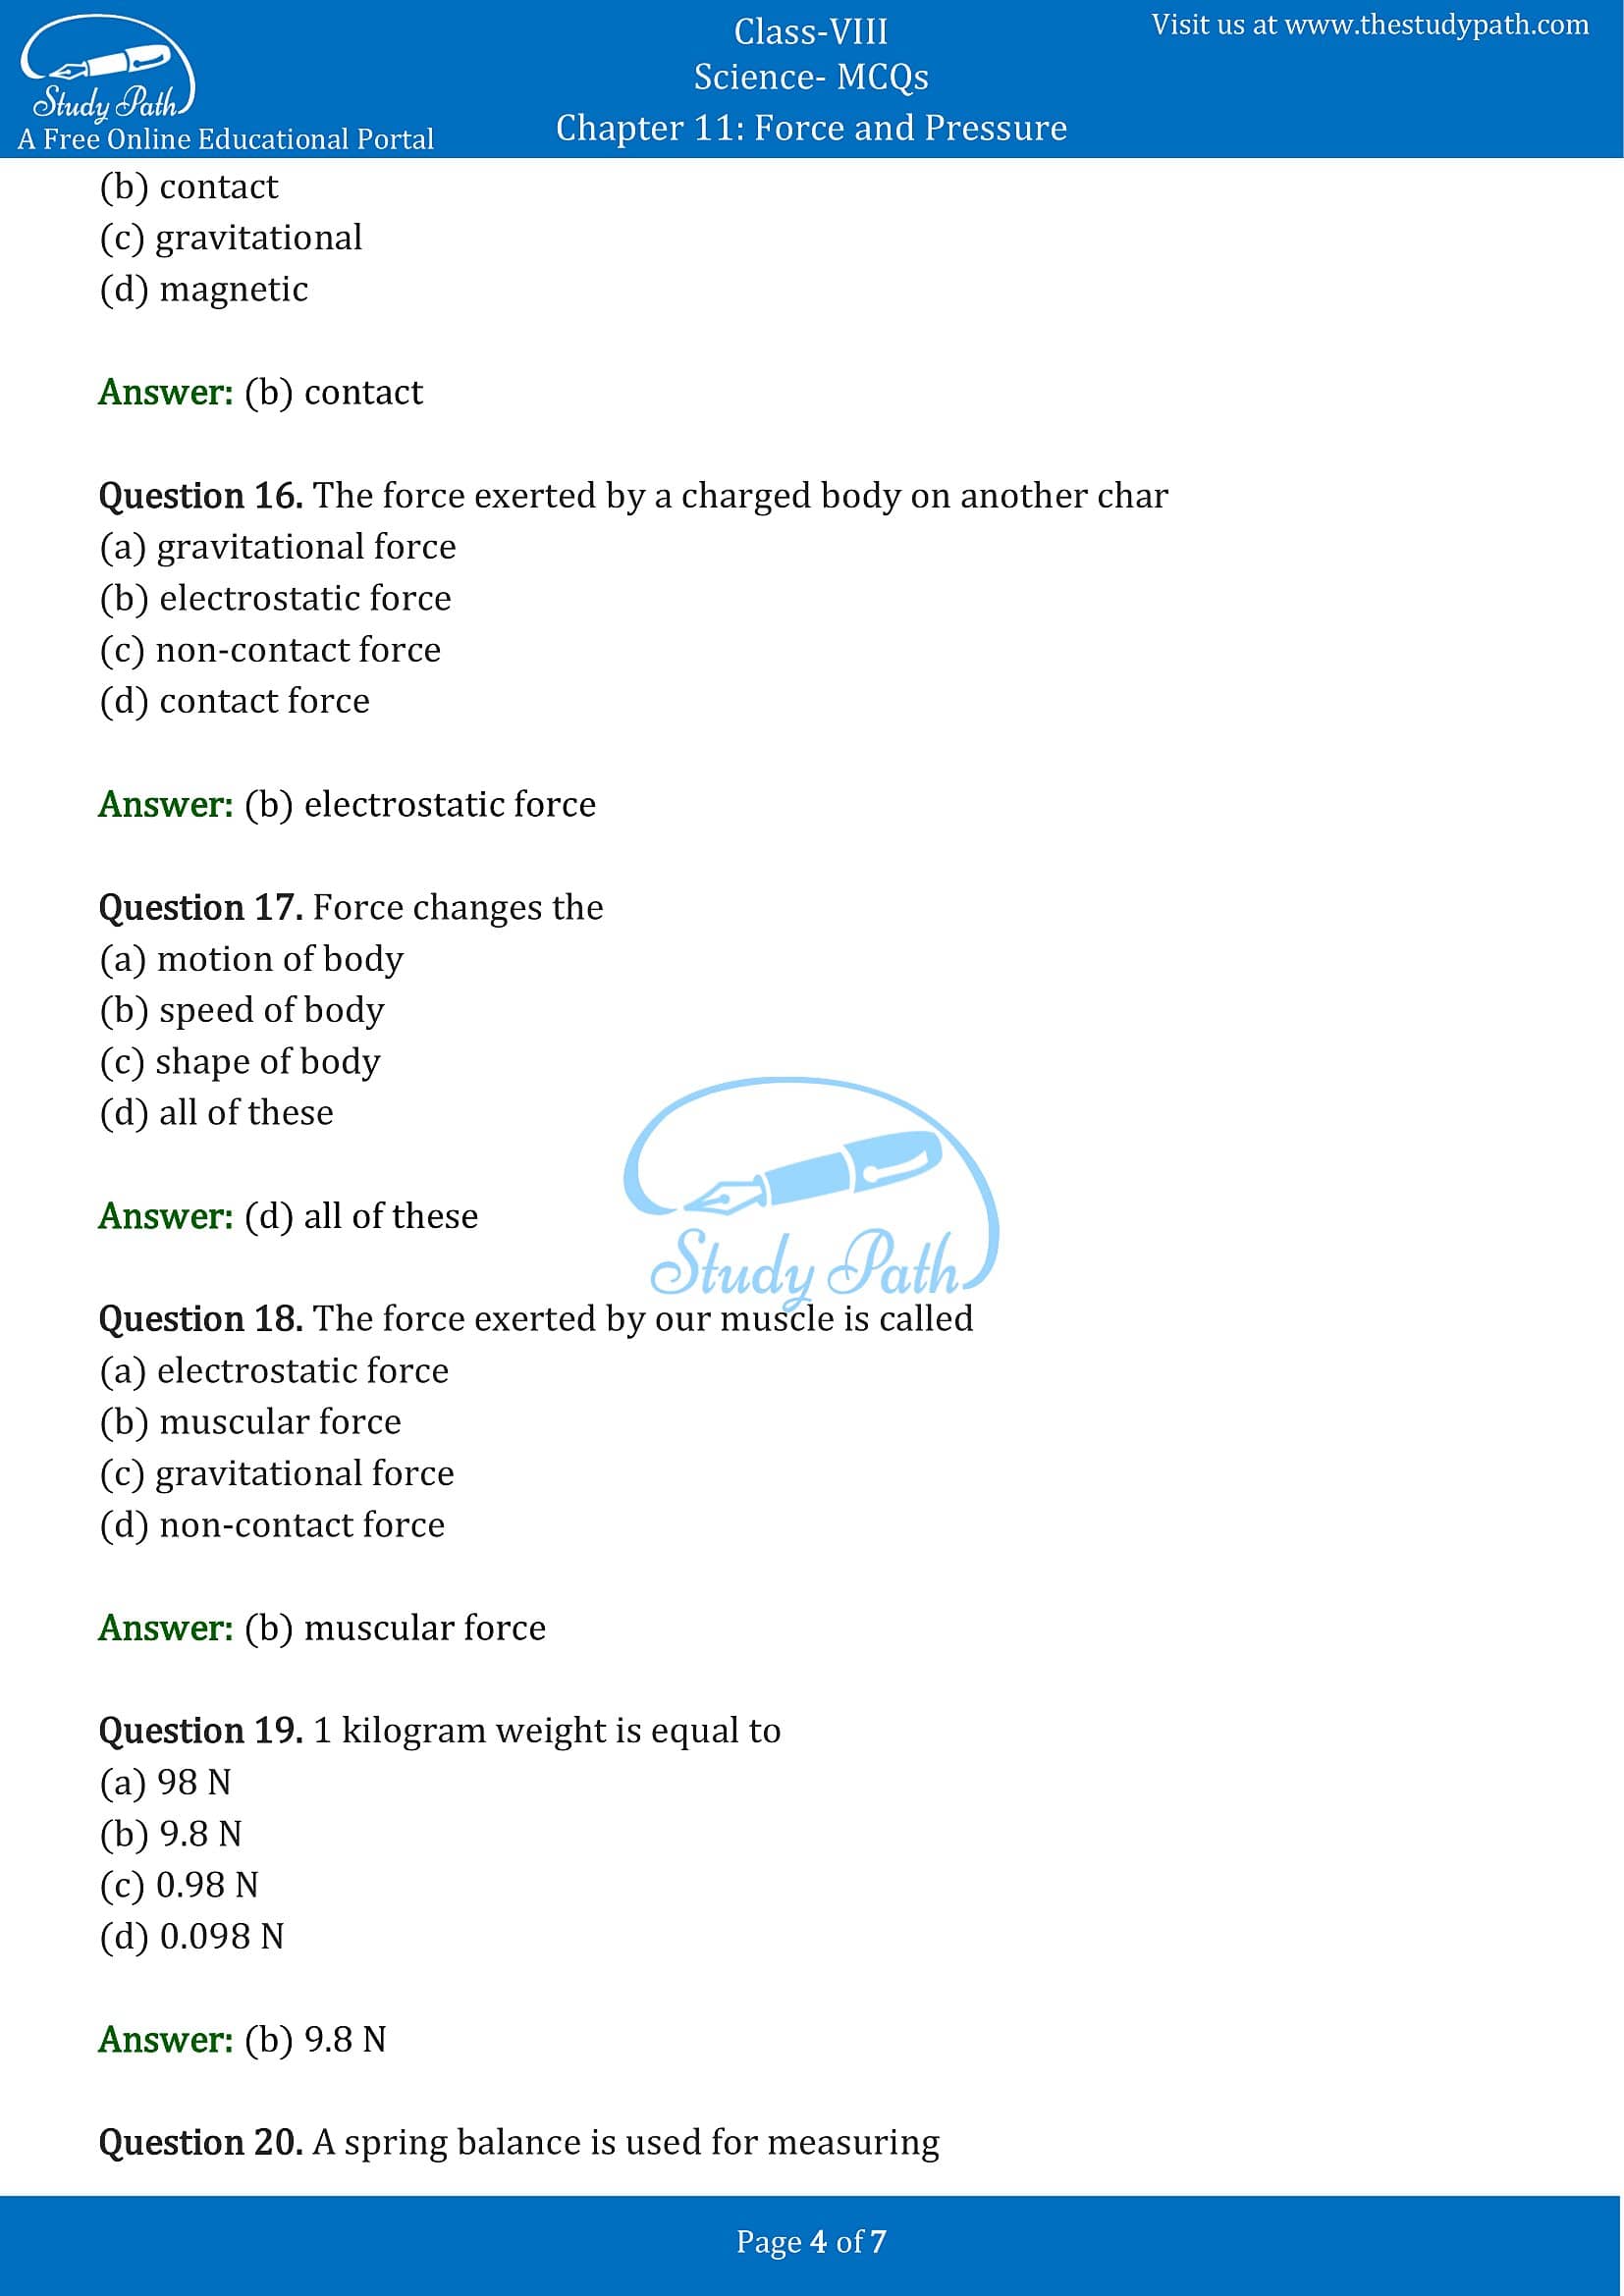 MCQ Questions for Class 8 Science Chapter 11 Force and Pressure with Answers PDF -4